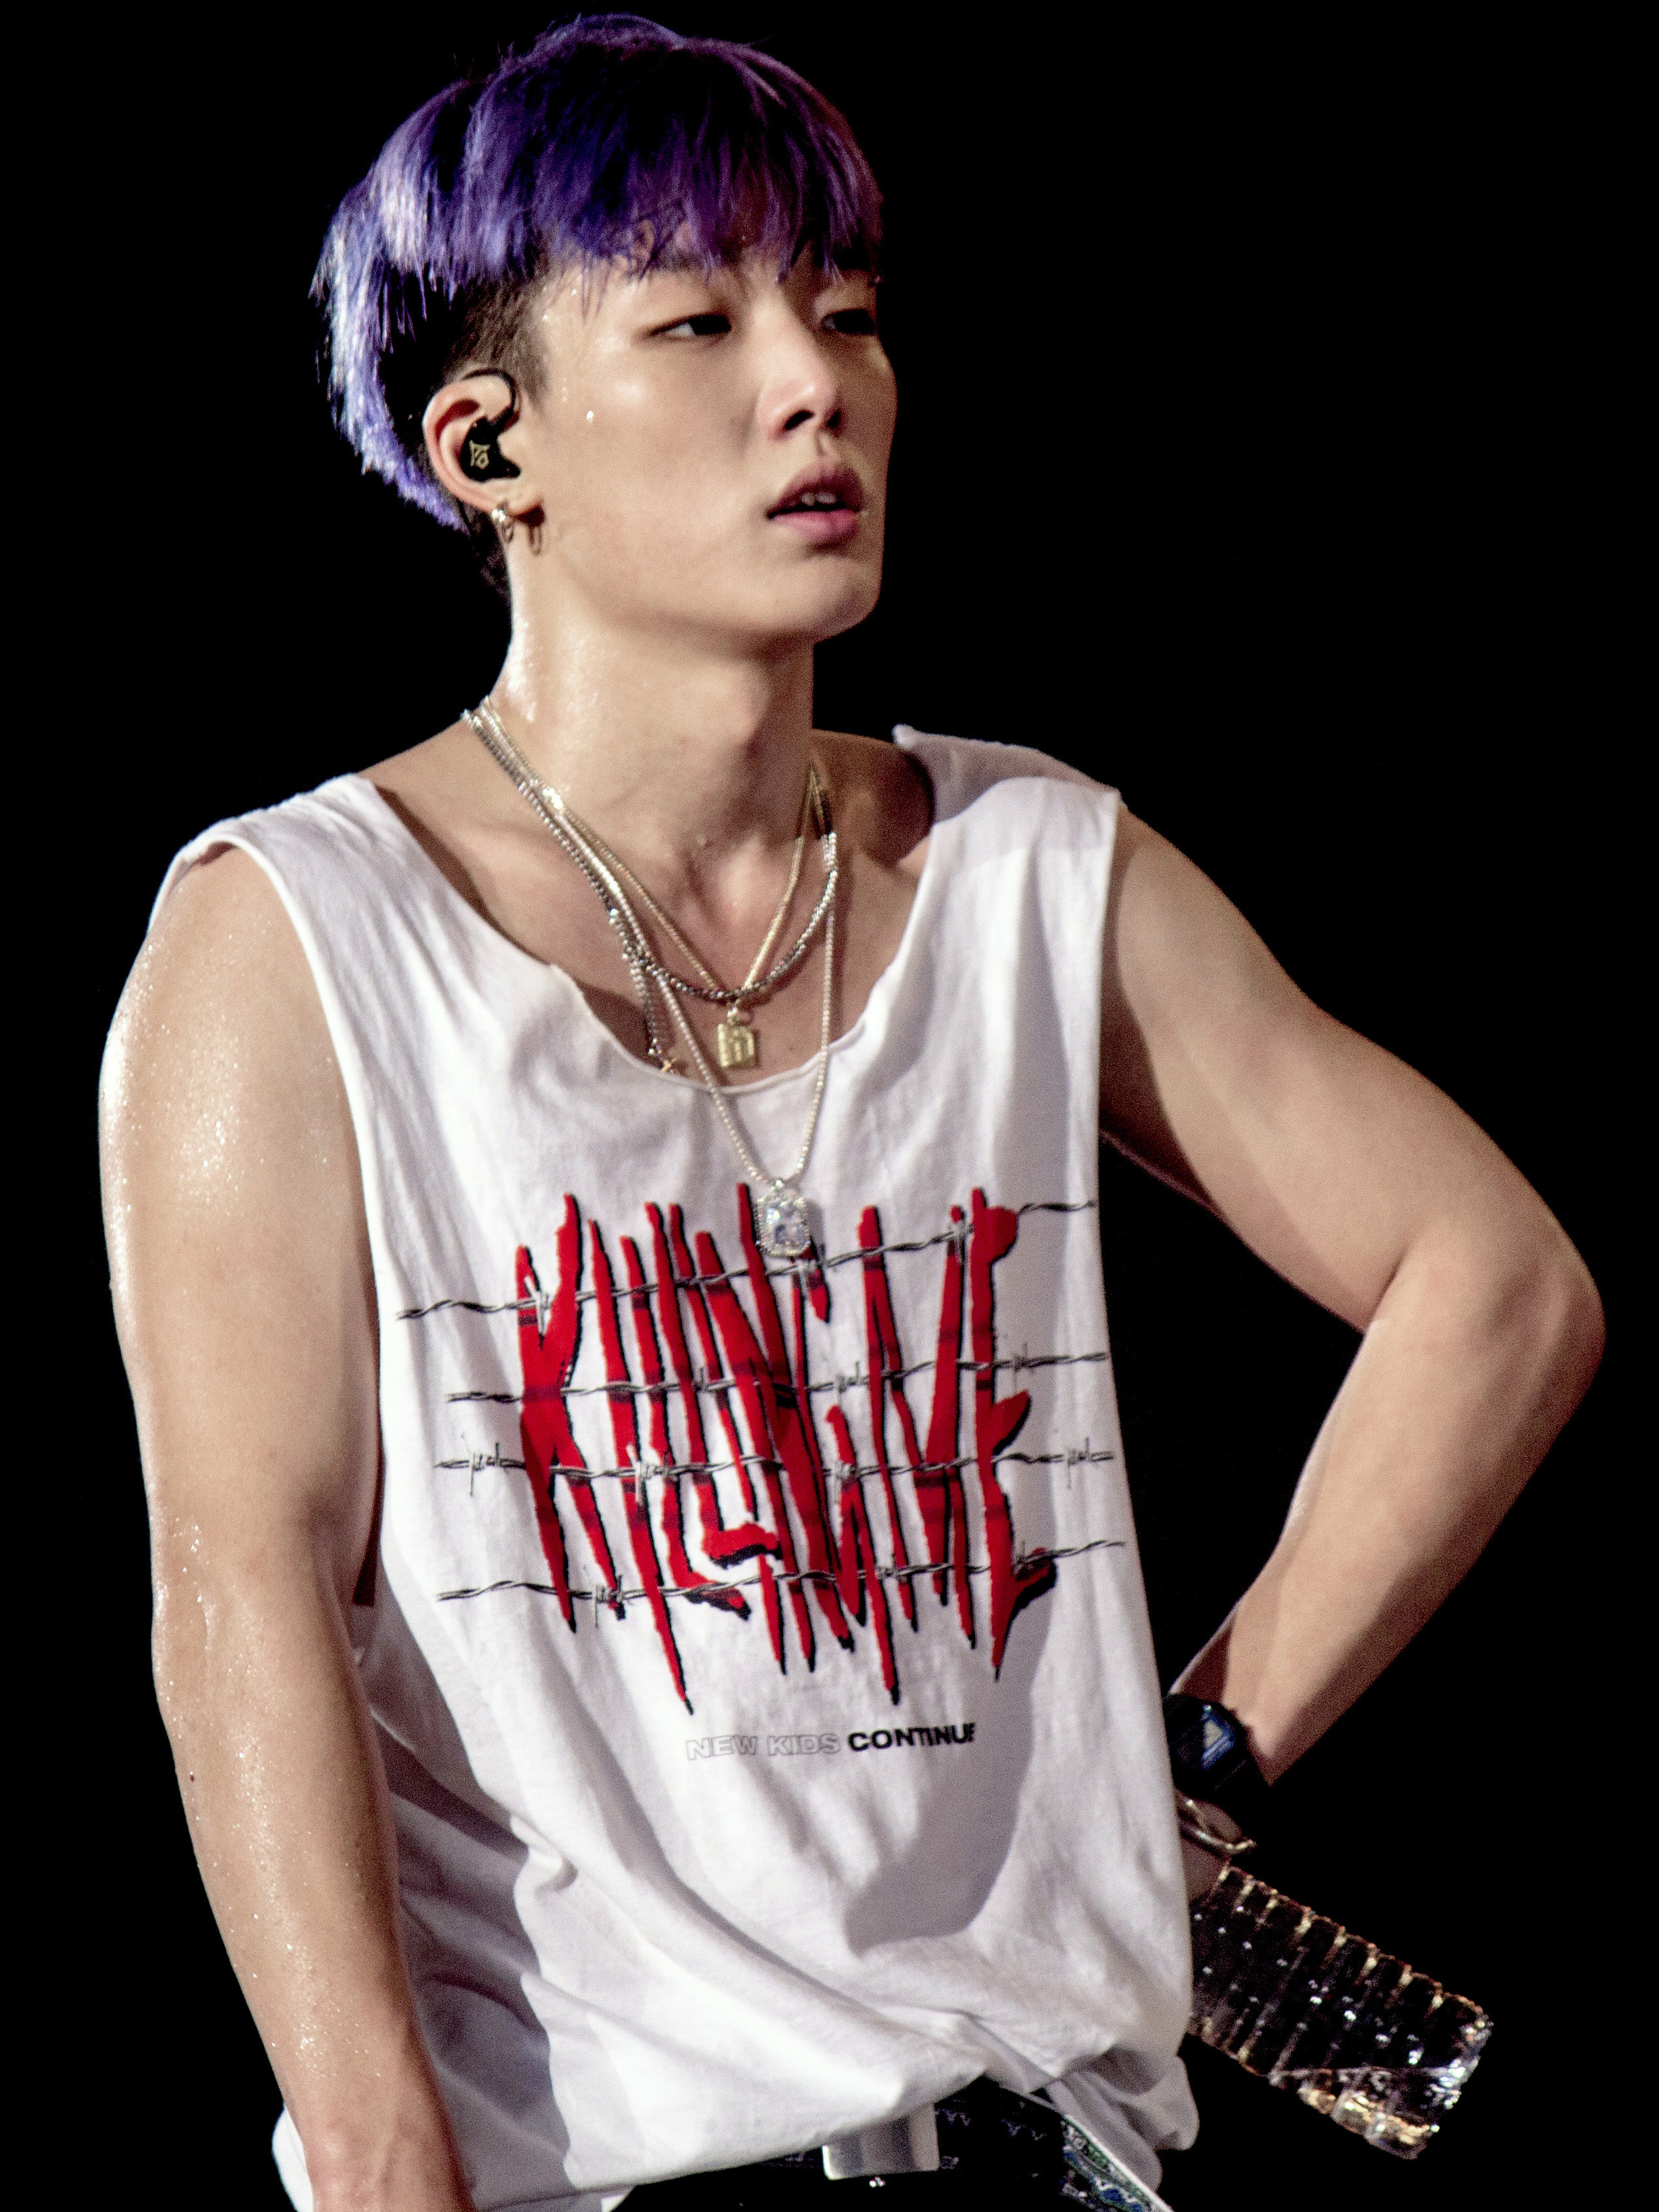 Bobby (Rapper) – Wikipedia Tiếng Việt